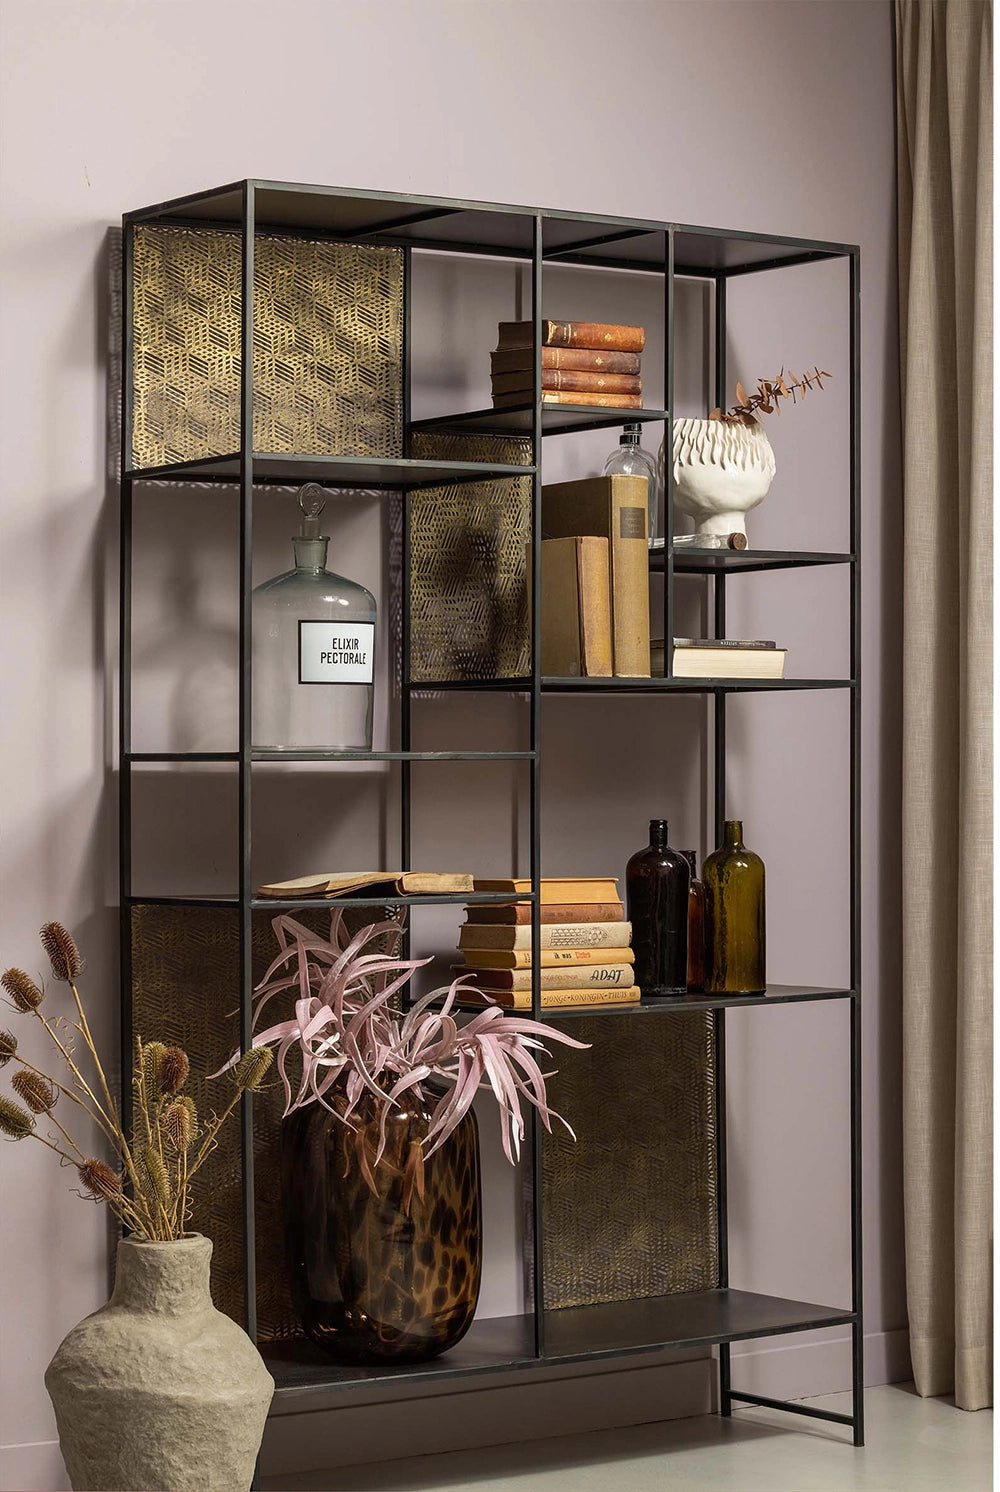 Viktor Display Cabinet in - Black/Antique Brass Finish with Vase and Books in Living Room Setting